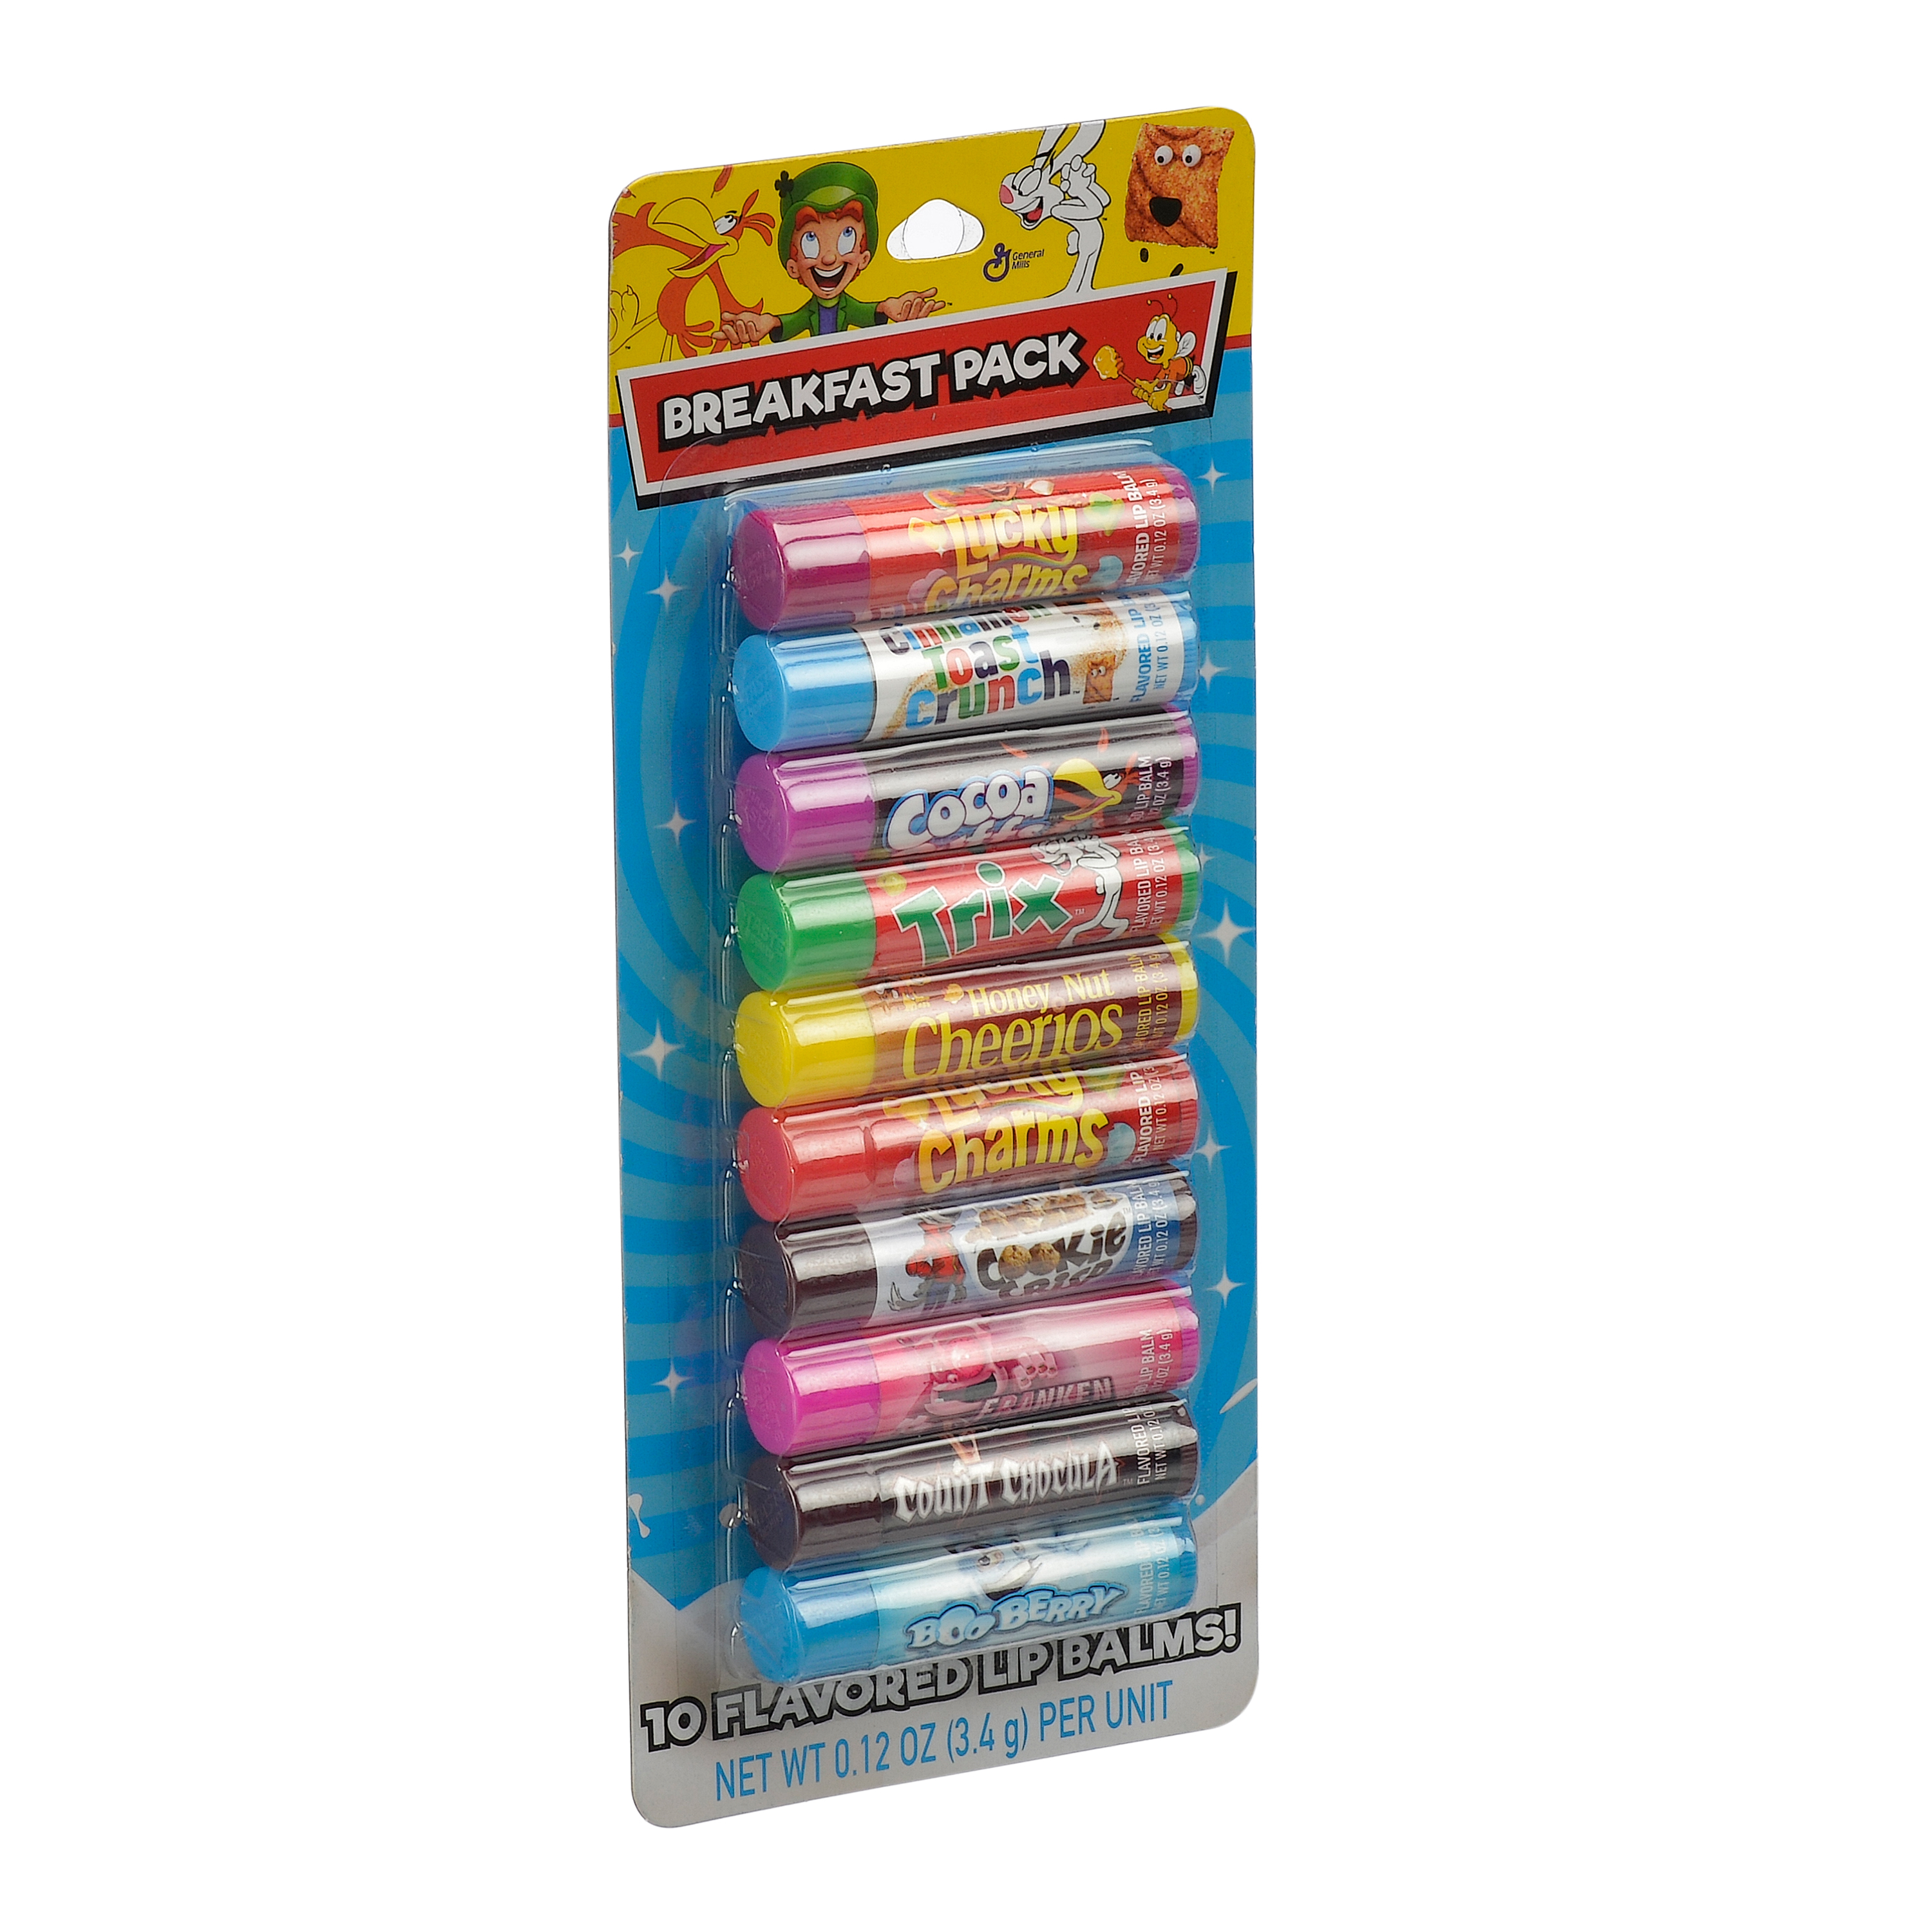 General Mills Breakfast Pack Cereal Flavored Lip Balm, 10 Pieces ($9.99 Value) - image 4 of 4